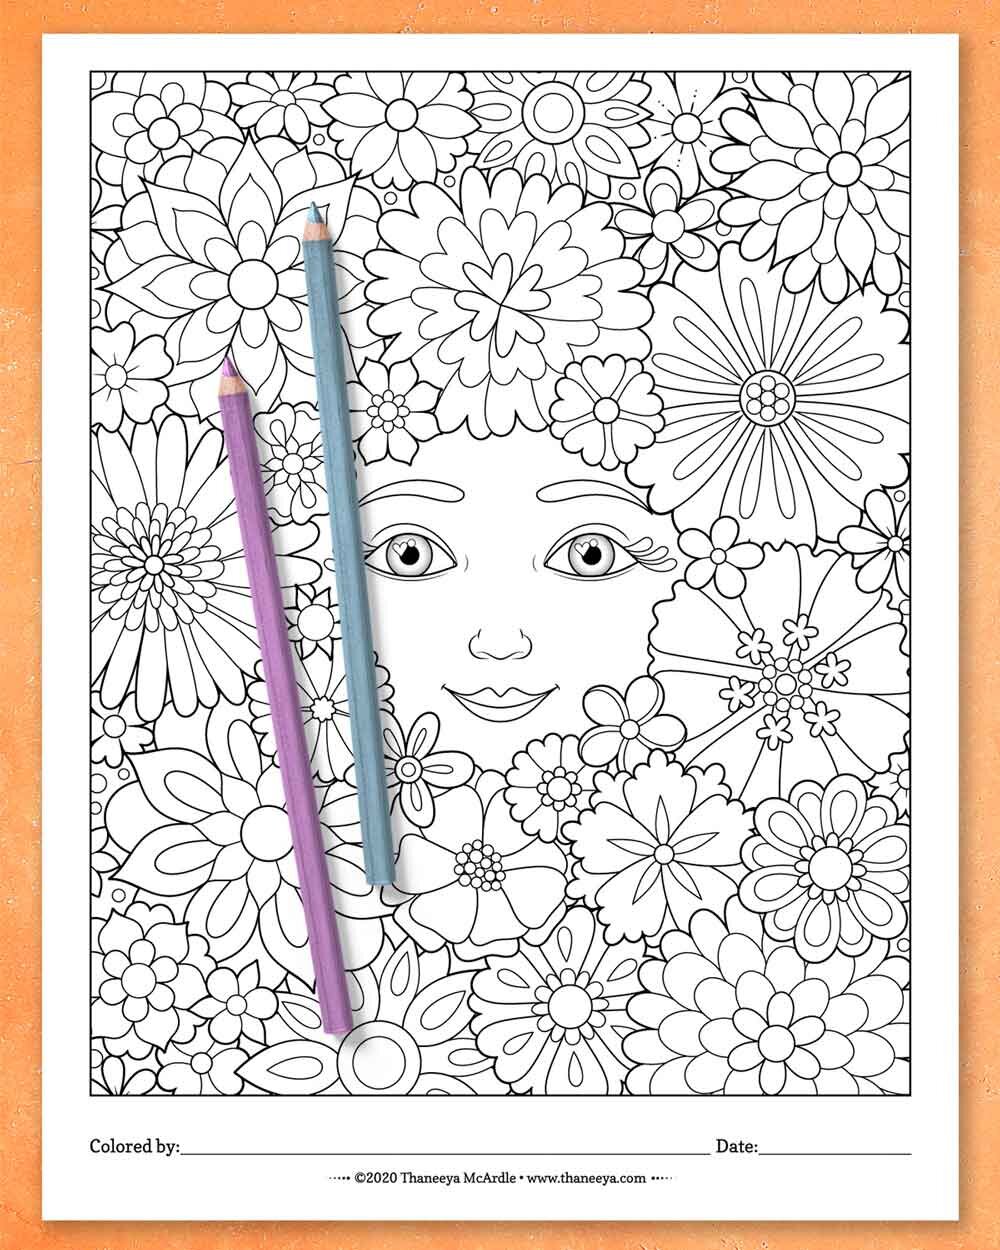 Enchanted Faces Coloring Pages   Printable Female Coloring Pages for  Adults, Teens and Kids — Art is Fun